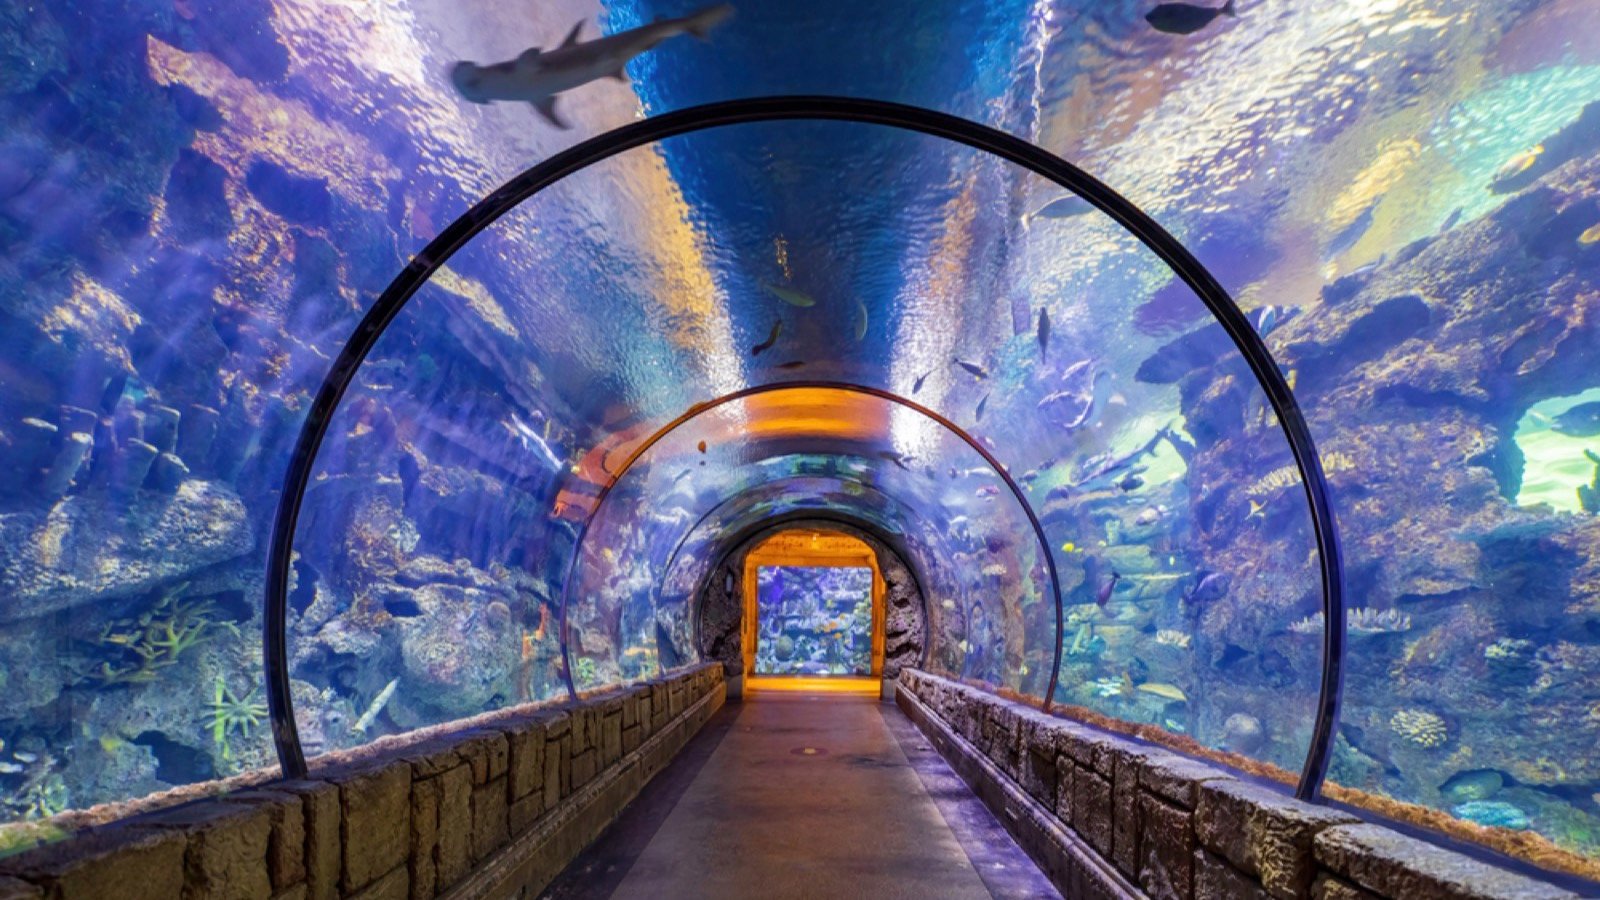 <p>Las Vegas is nowhere near the ocean, but that doesn’t mean you can’t experience a trip under the sea here. Located in Mandalay Bay, visitors can walk through a 1.6-gallon aquarium where over 15 different species of sharks call home. You can’t get closer to these predators than that. Tickets cost around $25, but seeing these sharks swim 5 feet above your head is worth the thrill.</p>